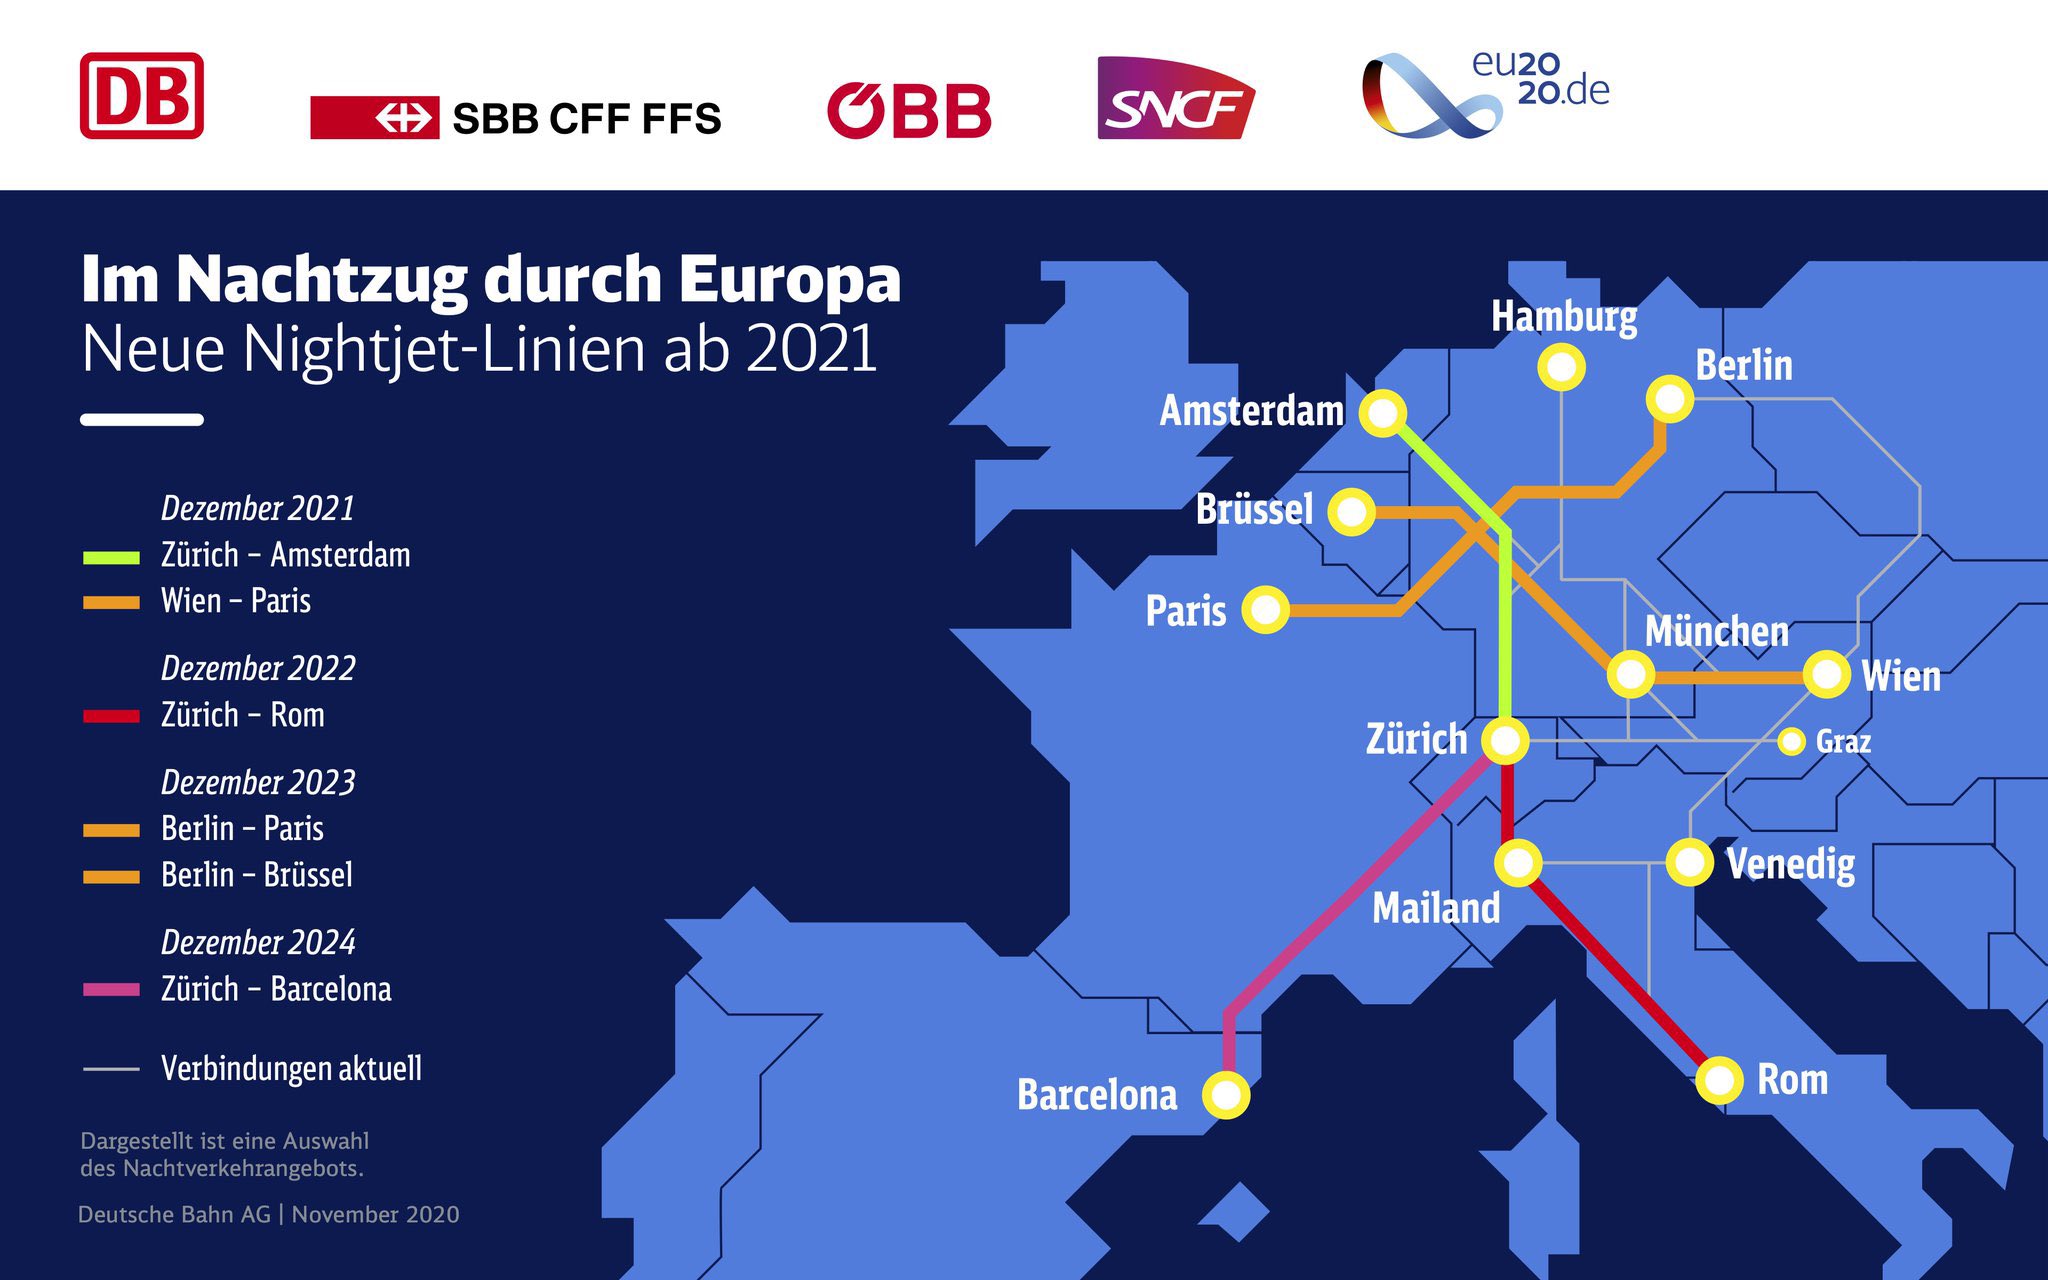 Map with the new nighttrain lines and their operational year. They will connect Germany to Switzerland, the Netherlands, Italy, France, Spain, Austria, Belgium.